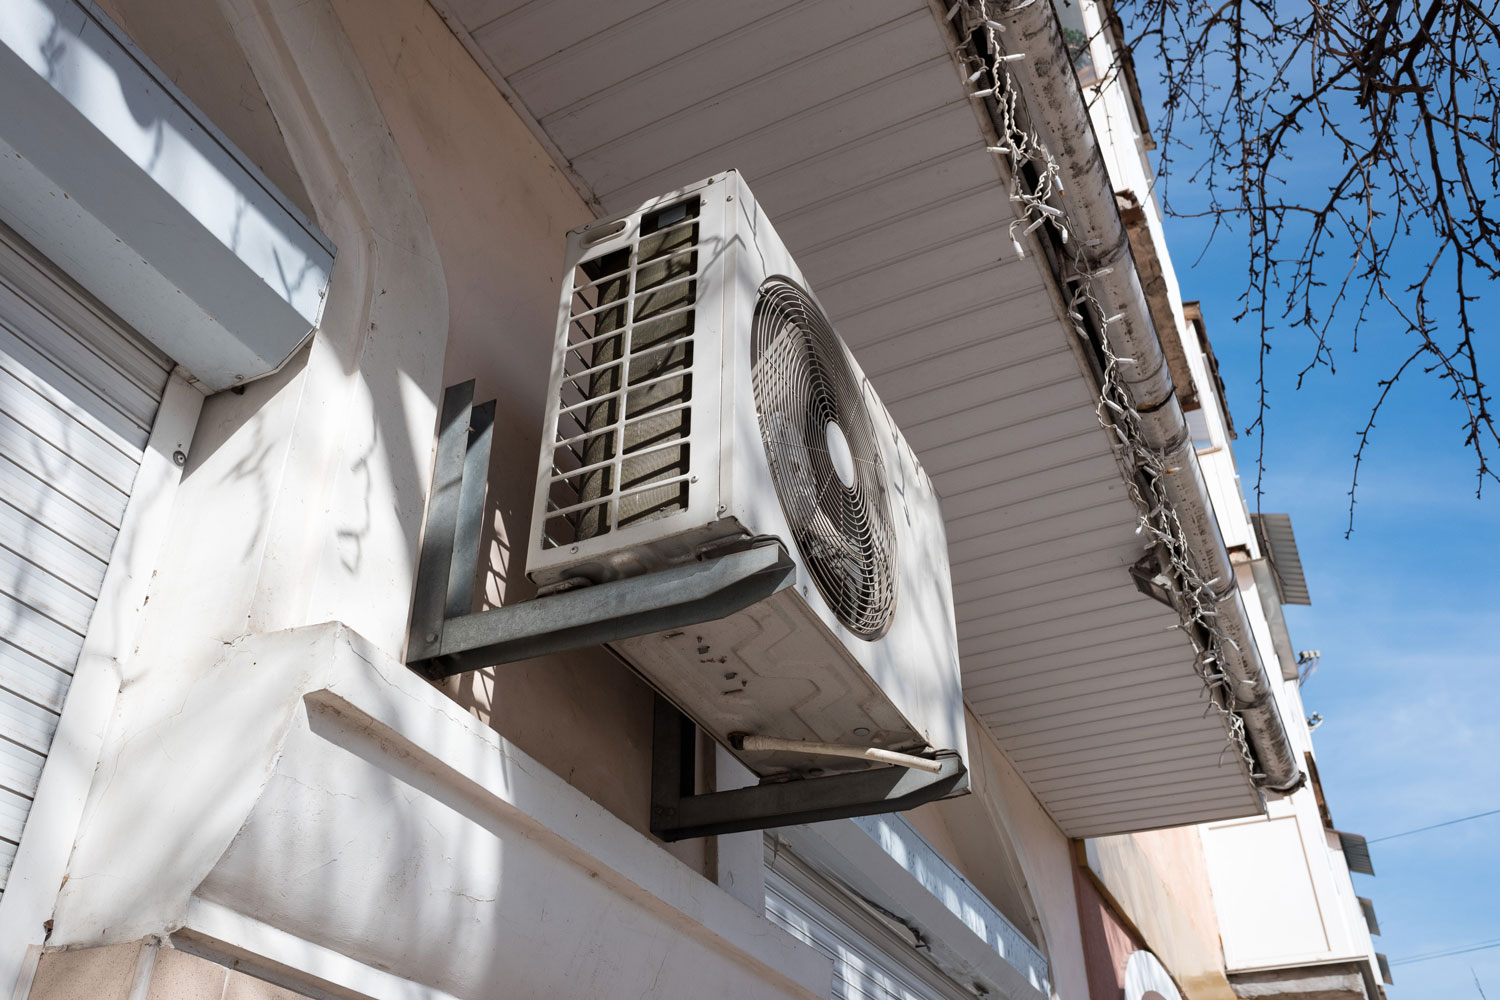 An air conditioning unit mounted on the exterior wall